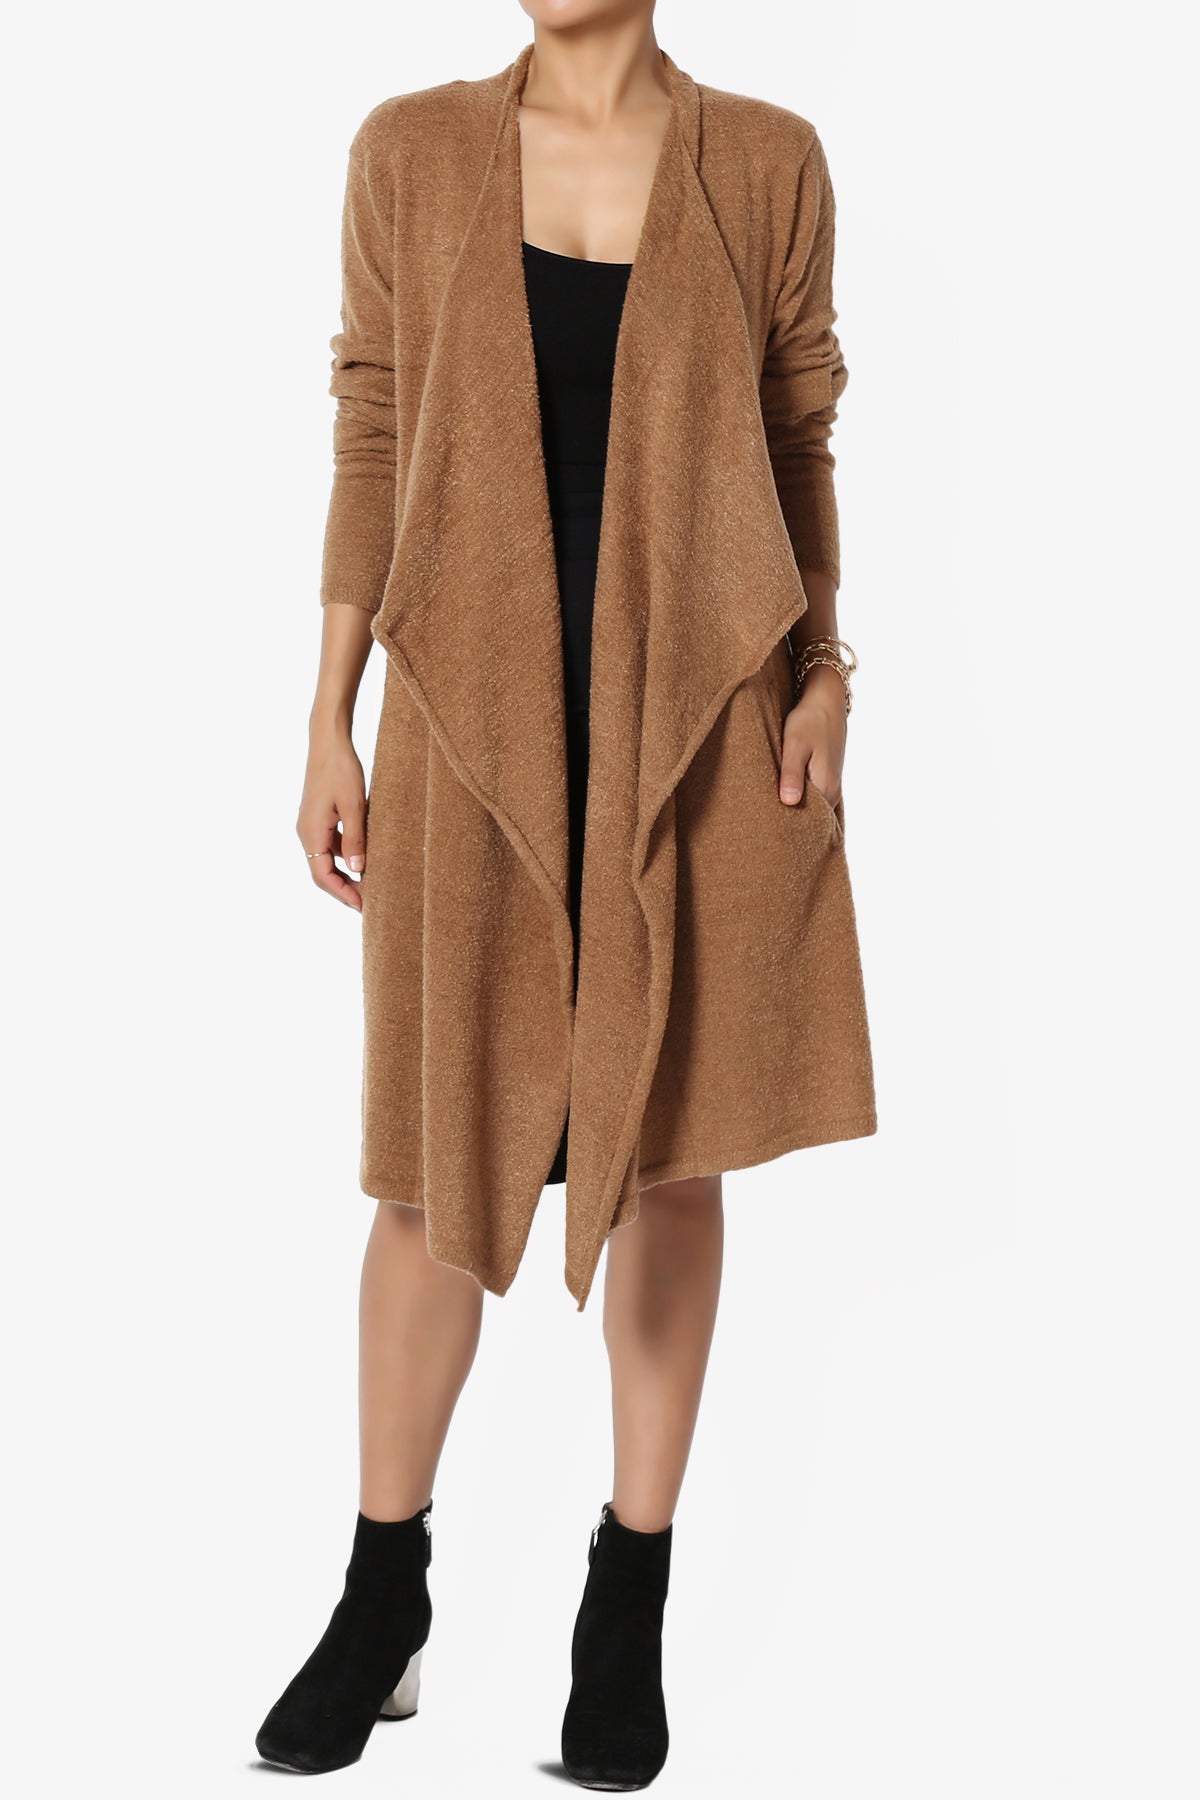 Let's Get Going Cardigan Sweater - Camel, Fashion Nova, Sweaters